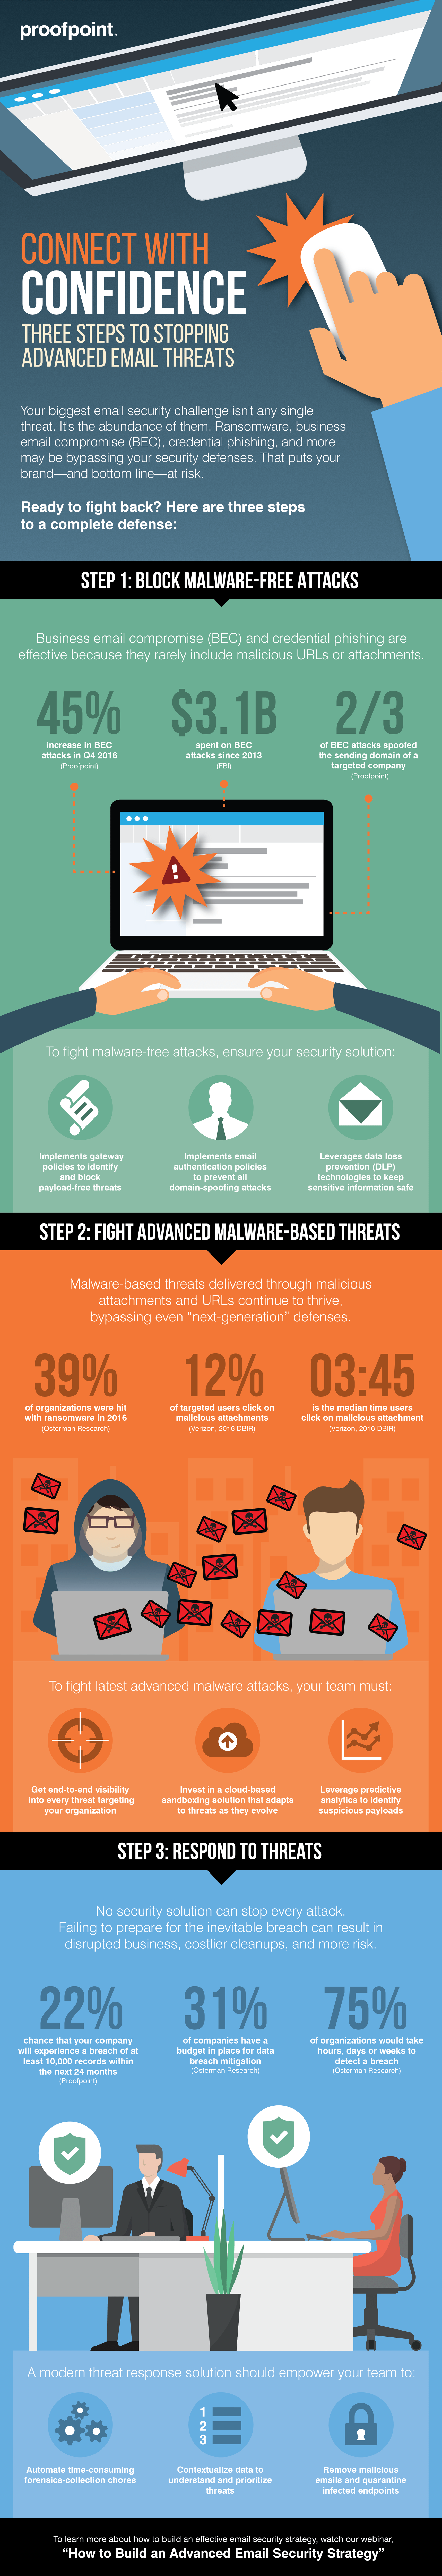 Three ways to fight advanced email threats infographic